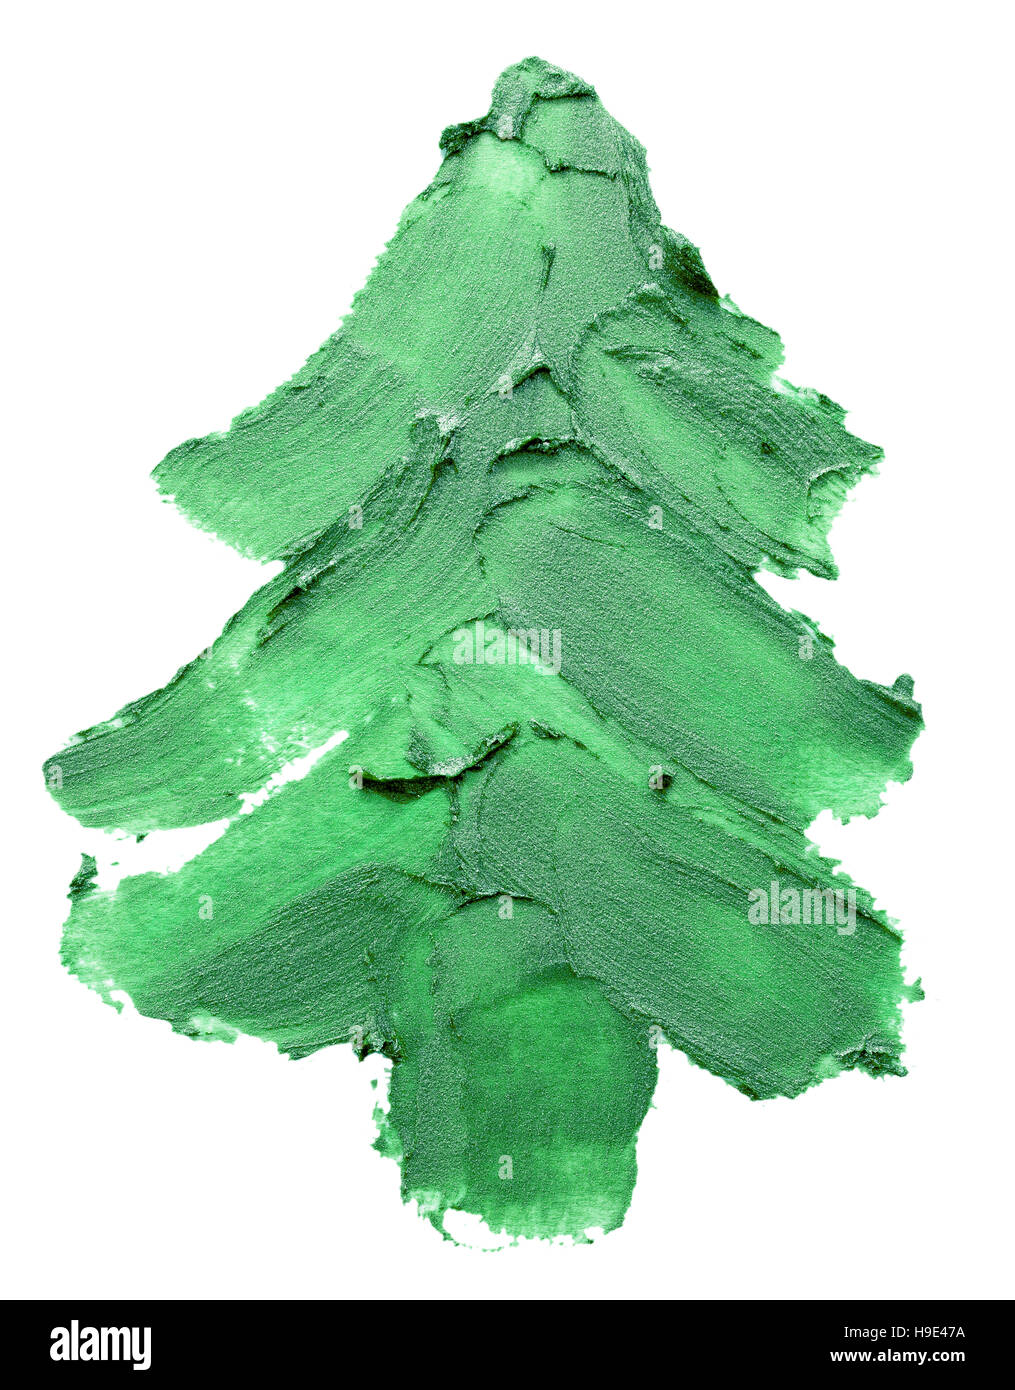 Christmas tree of green paints stroke isolated on the white background. Stock Photo